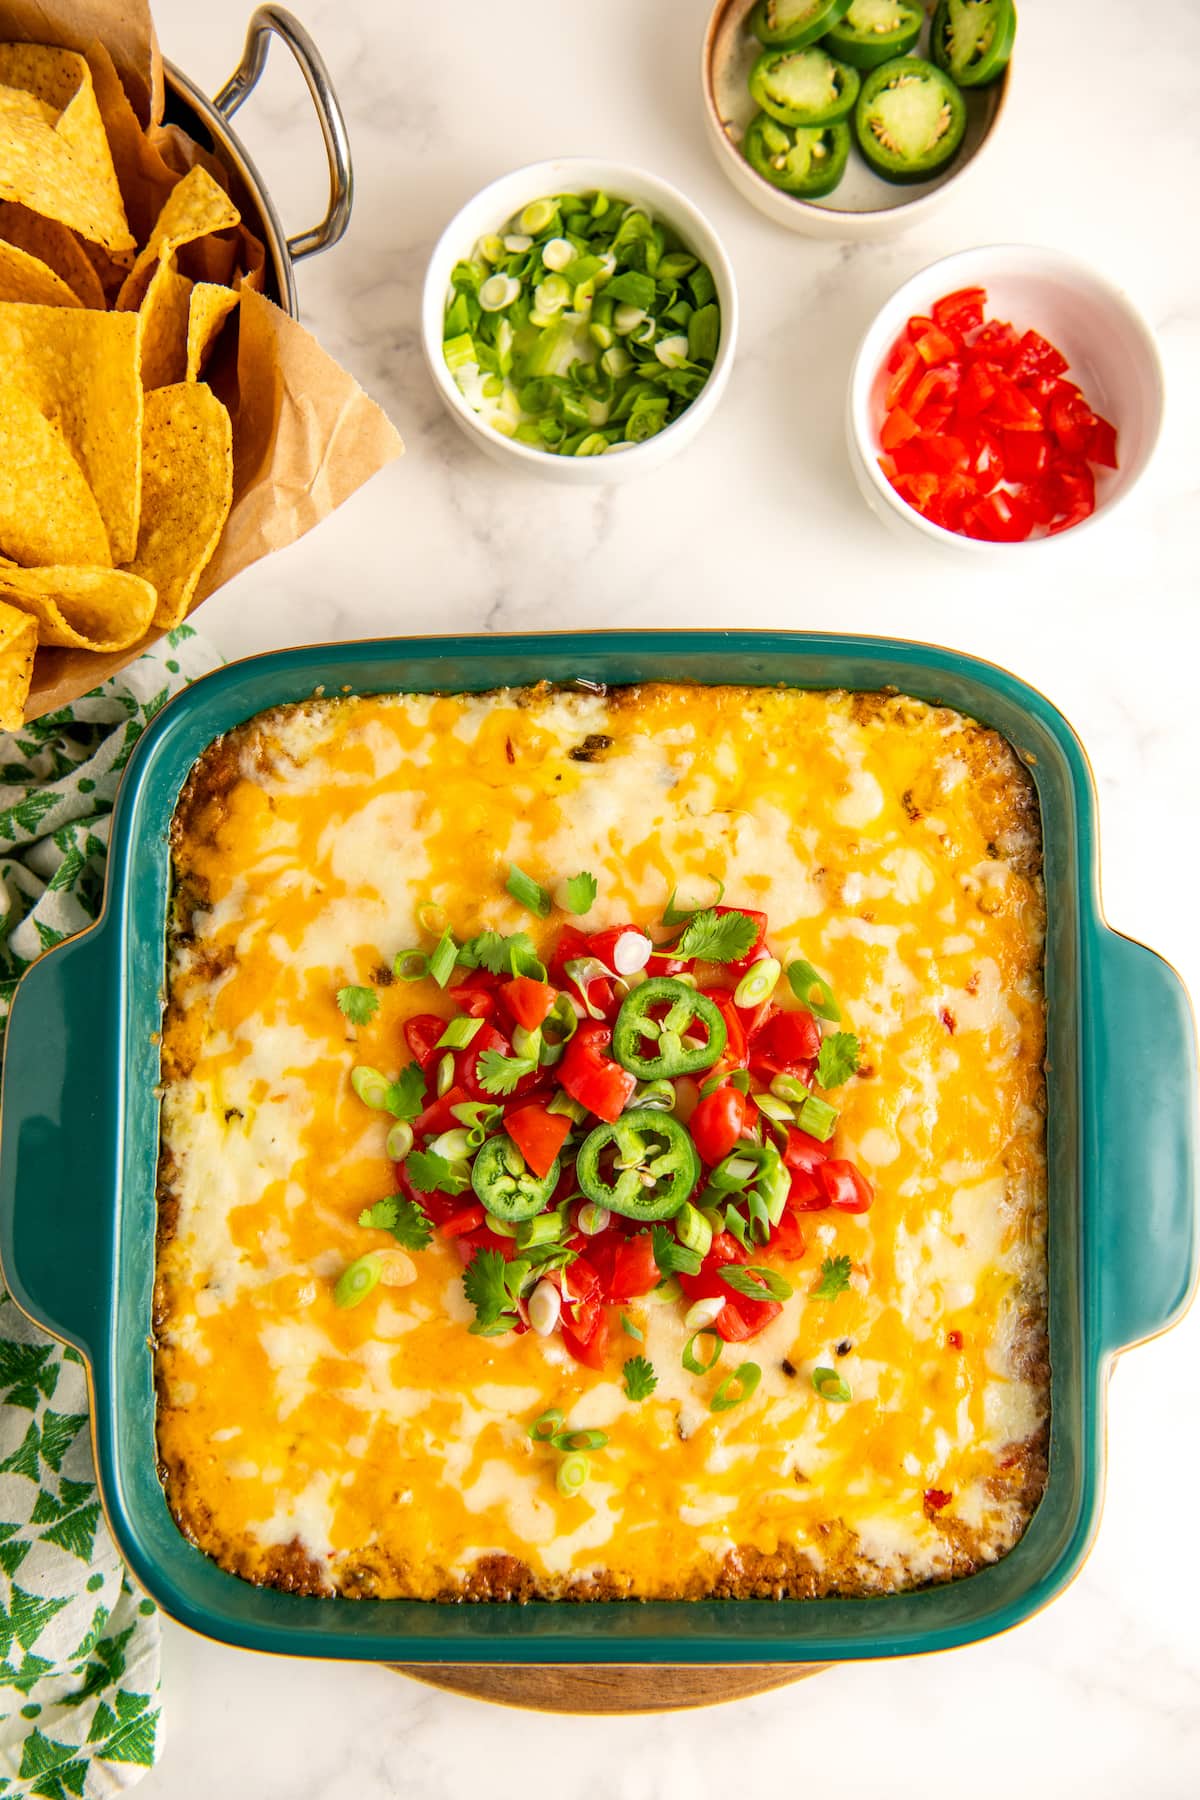 Bean dip garnished with tomatoes, jalapenos, cilantro, and green onions.